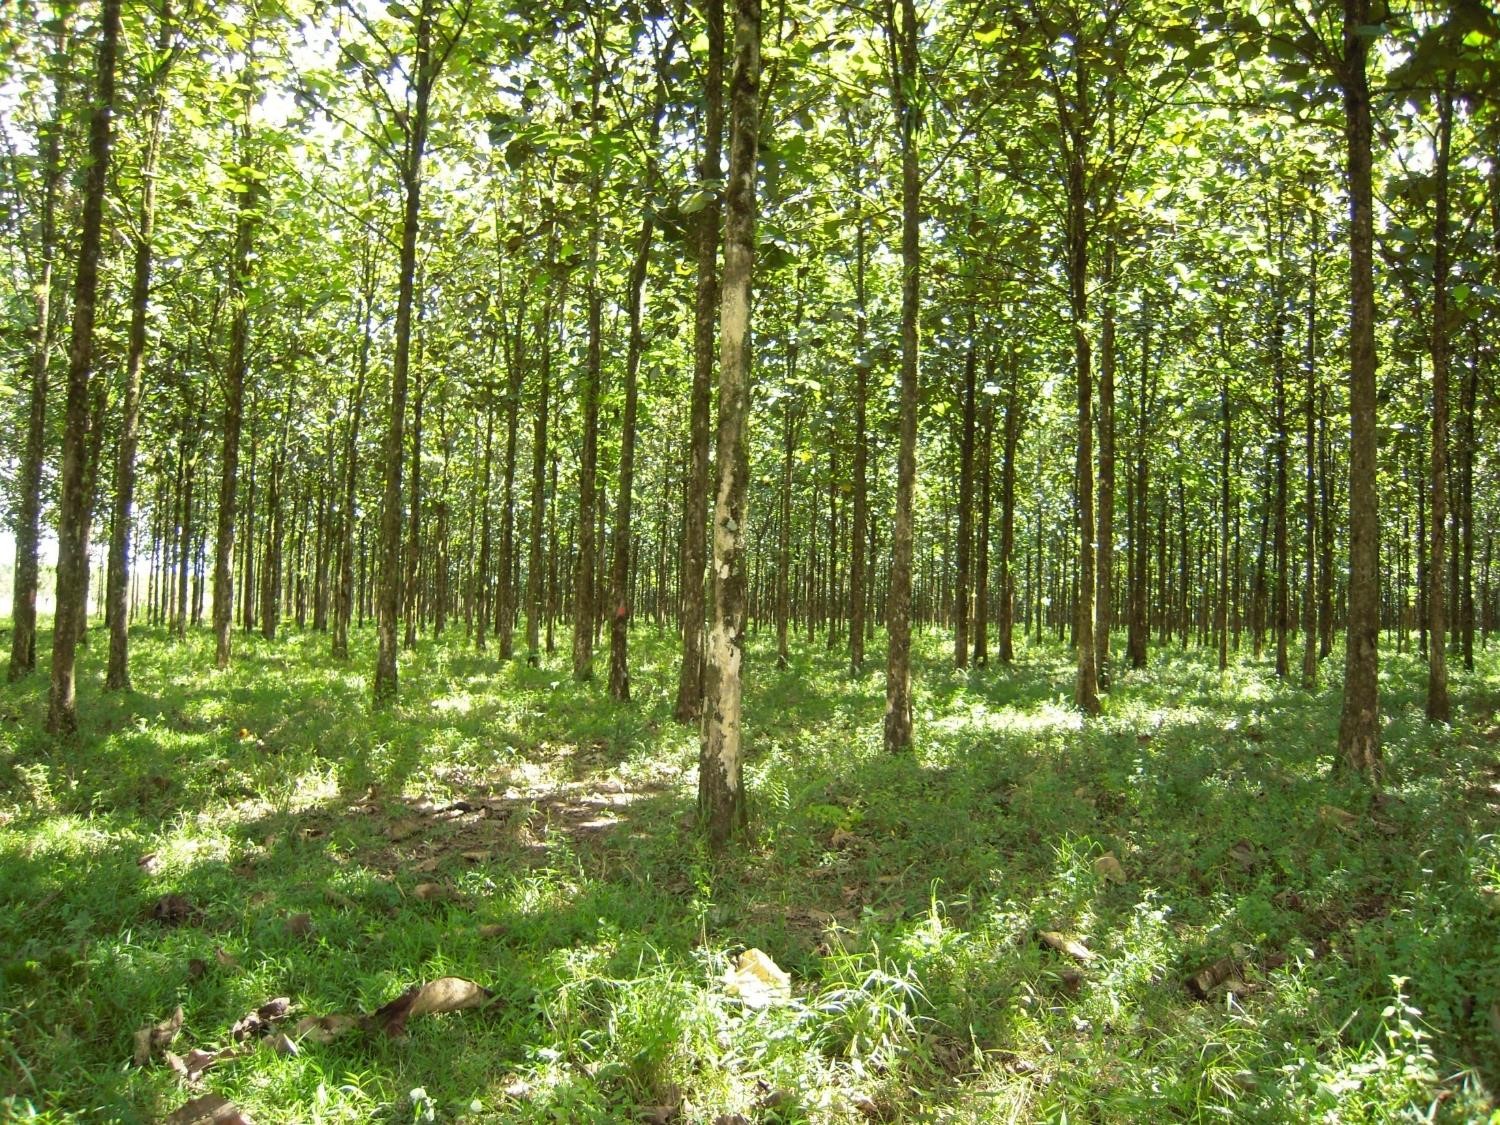 Beyond “plant trees!”: UMBC research finds tree plantations encroaching on essential ecosystems